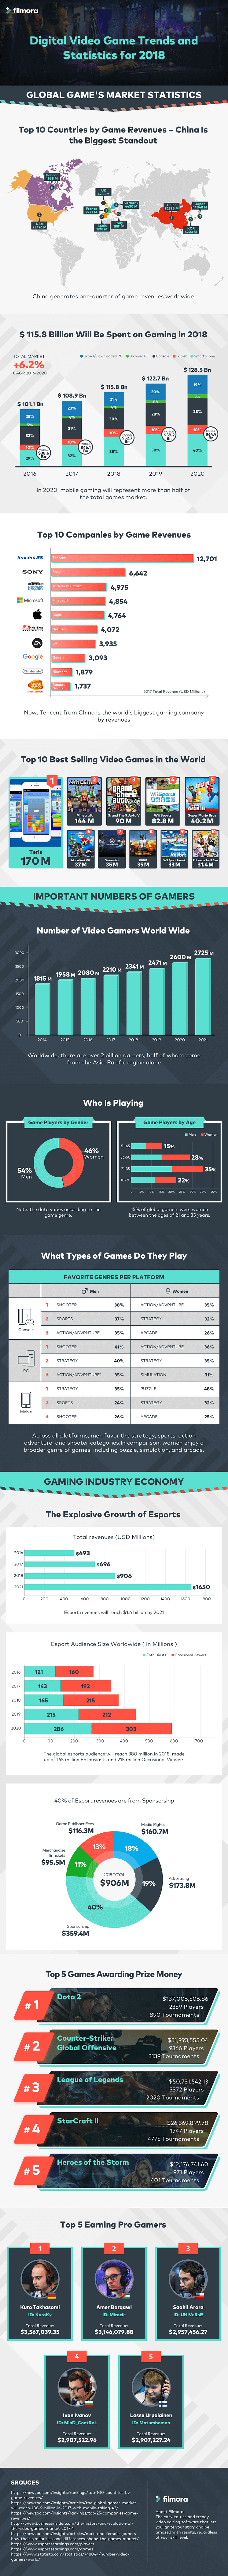 Video Game Trends & Stats